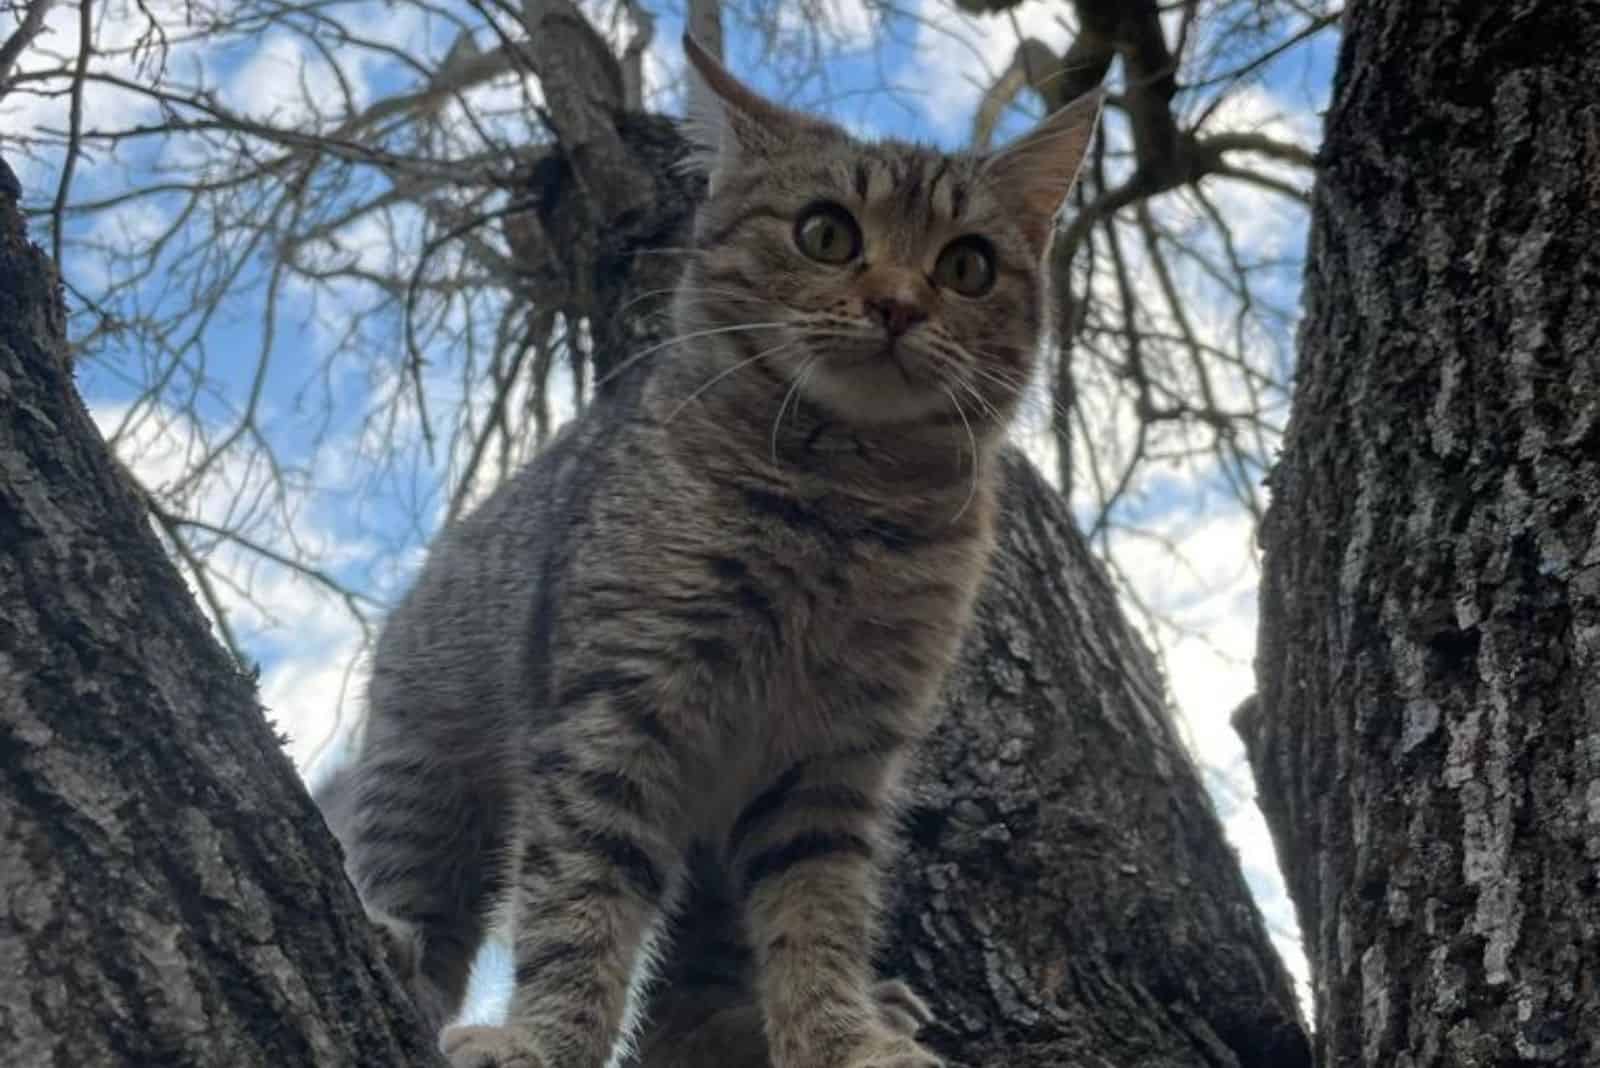 the cat is standing on the tree